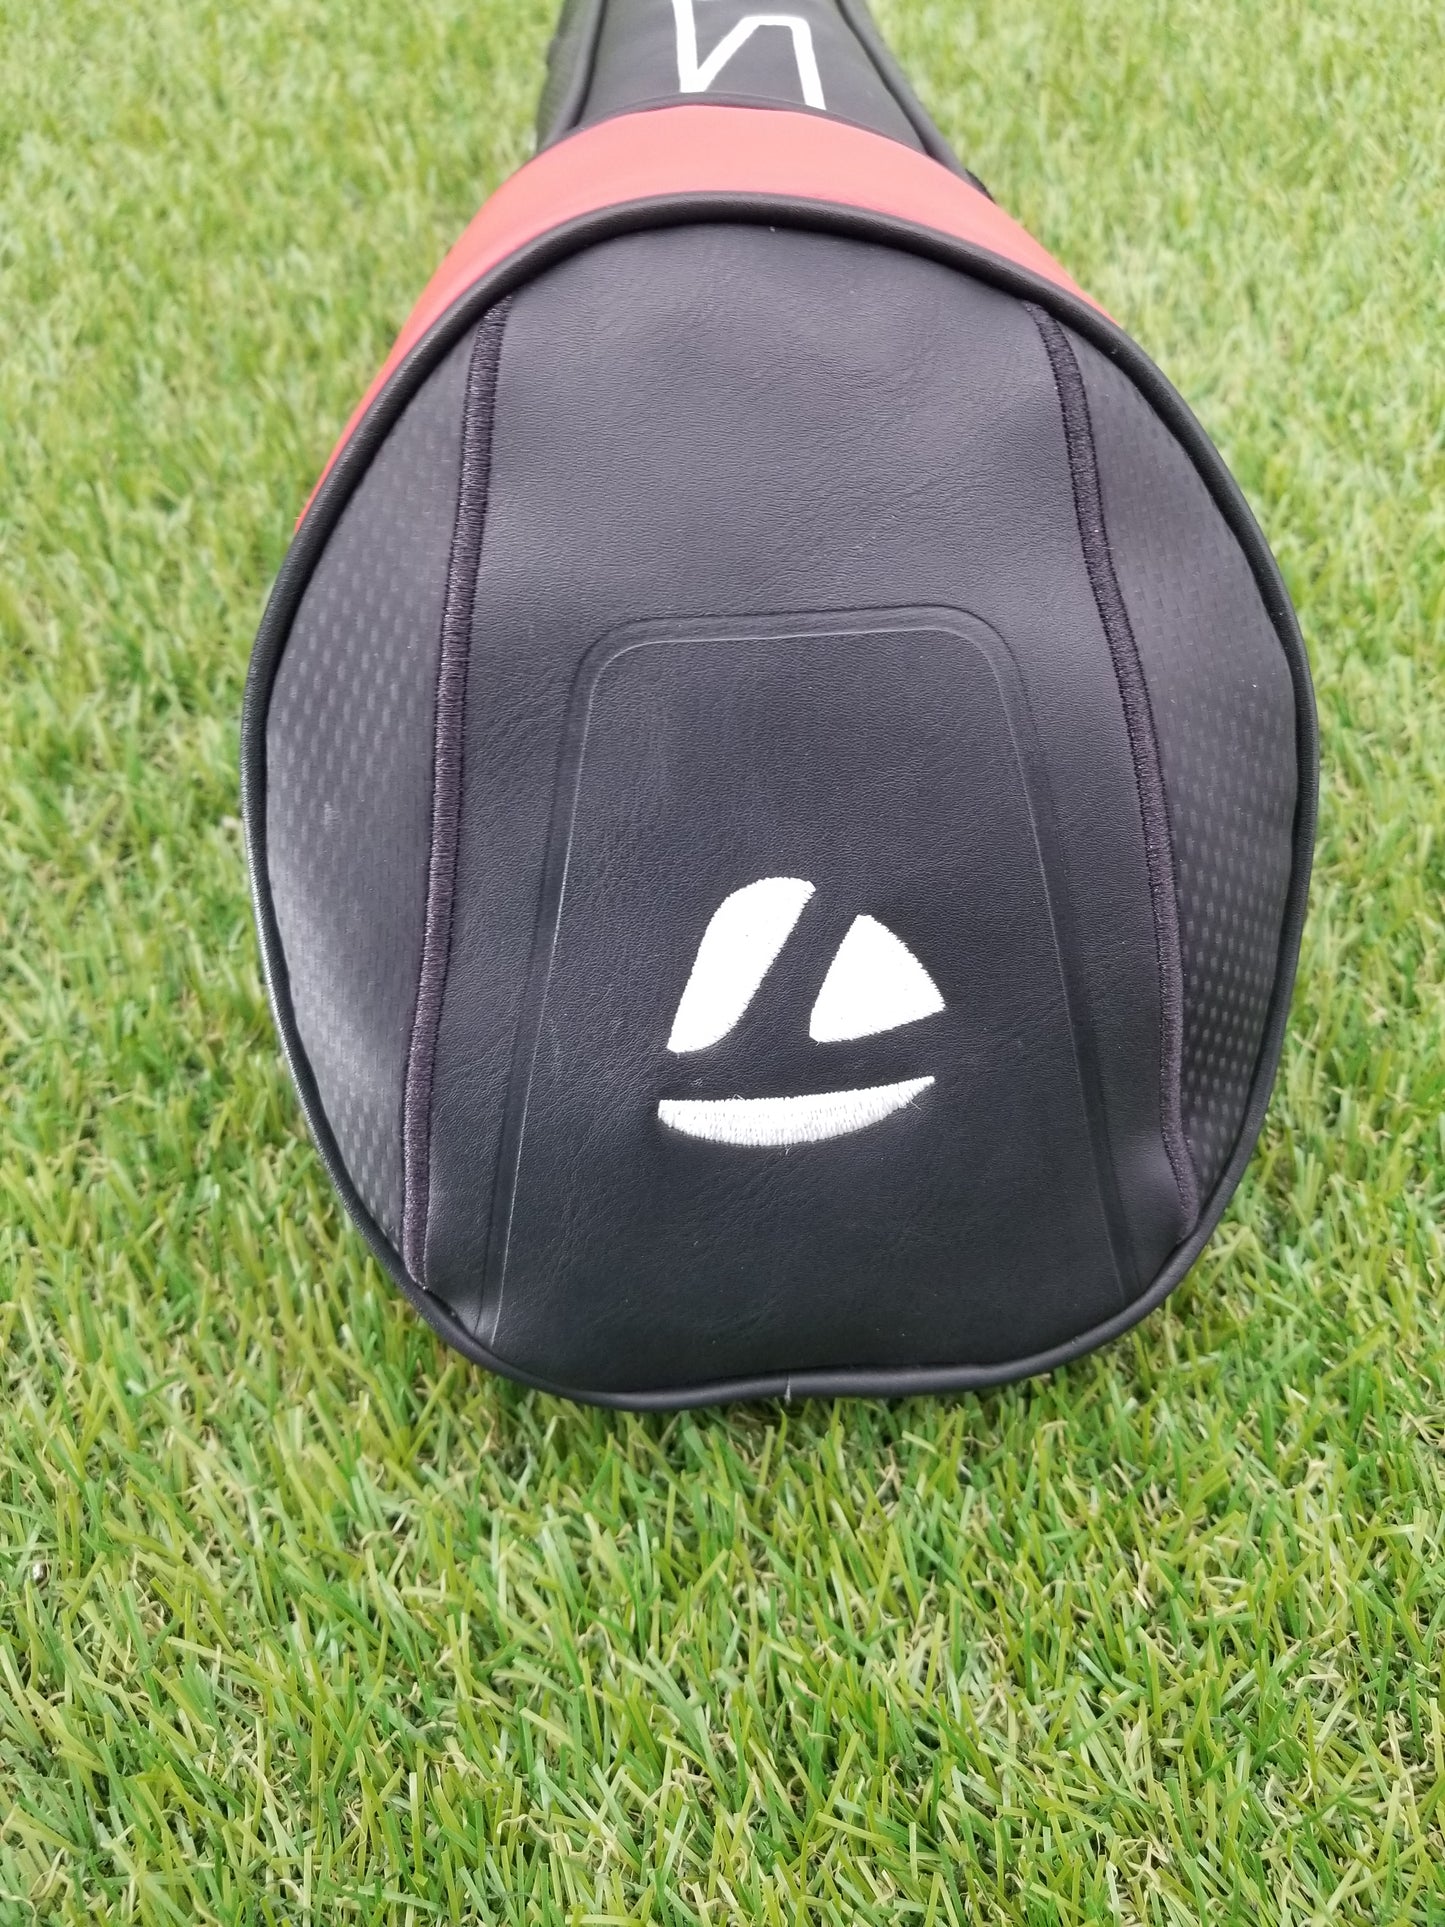 TAYLORMADE STEALTH DRIVER HEADCOVER VERYGOOD